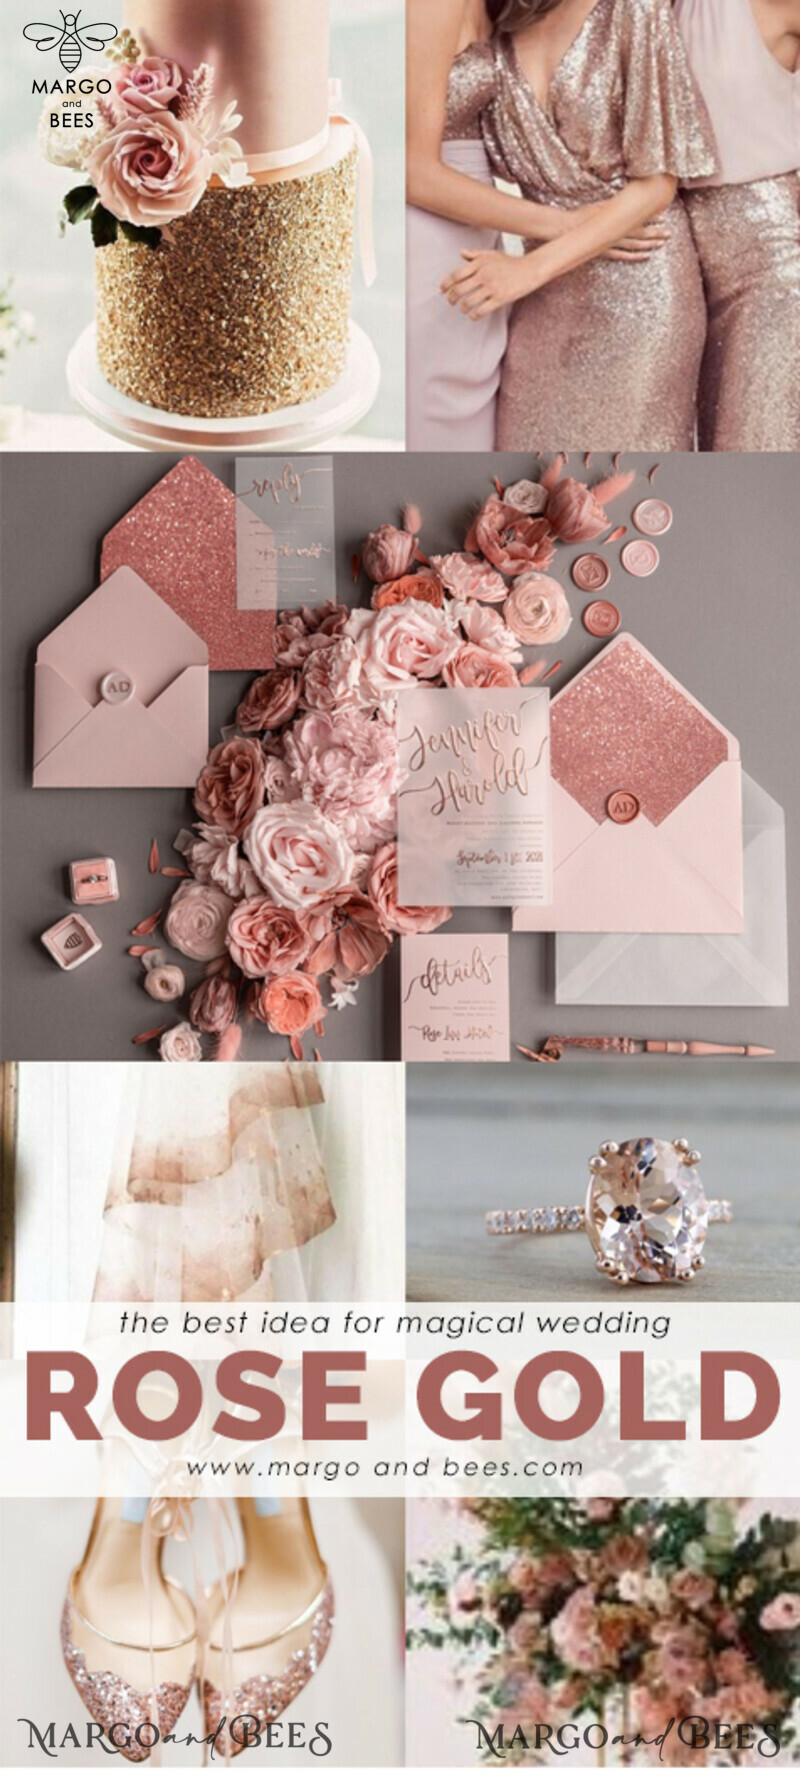 Luxury Rose Gold Wedding Invitations: Glamour Pink Glitter and Elegant White Vellum Wedding Cards in a Romantic Blush Pink Invitation Suite-9